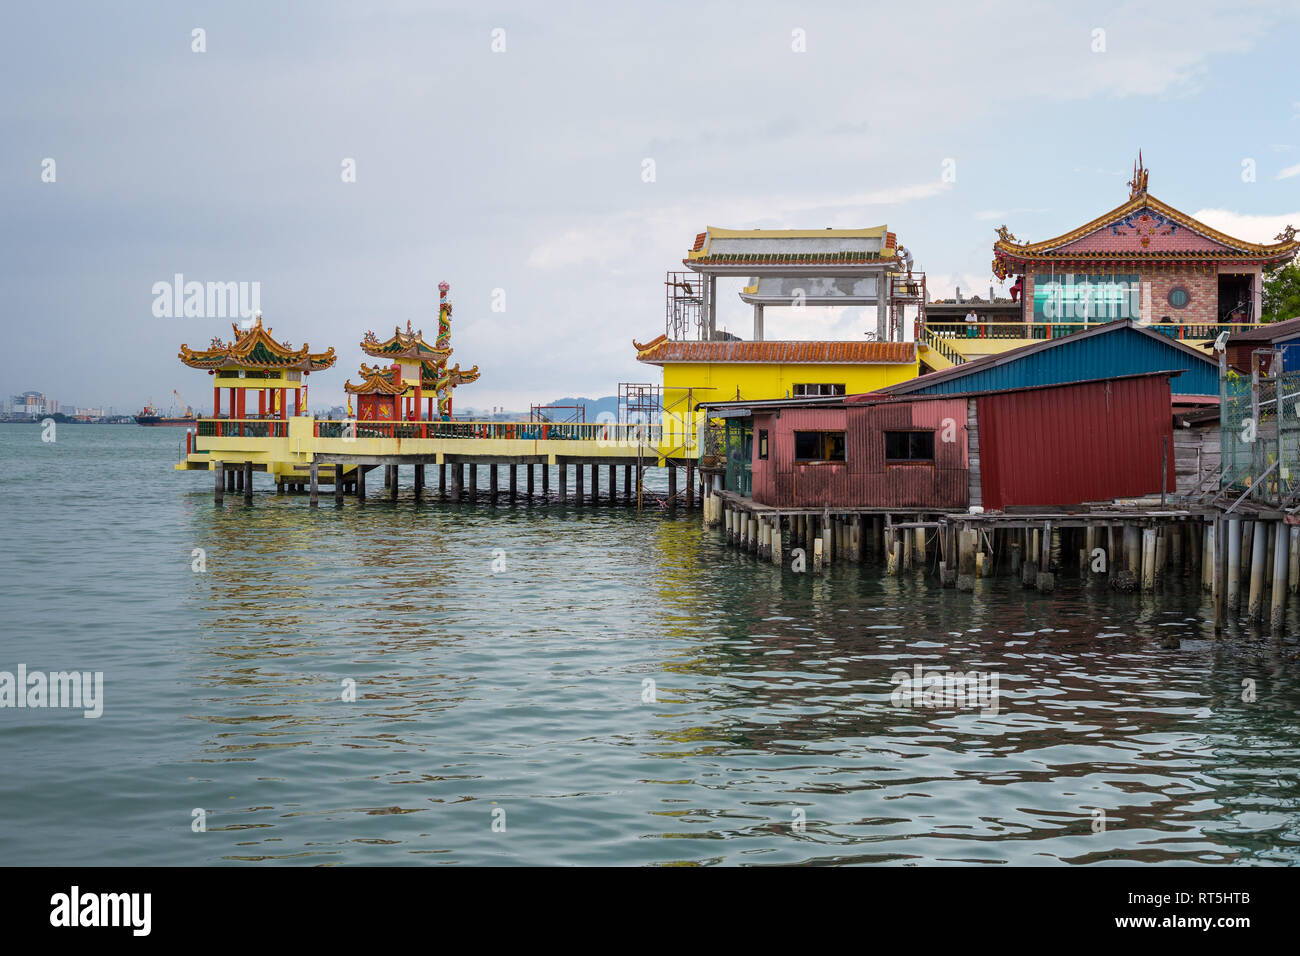 Hean Boo Thean Temple, Chew Jetty, Stilt Houses, George Town, Penang, Malaysia Stock Photo